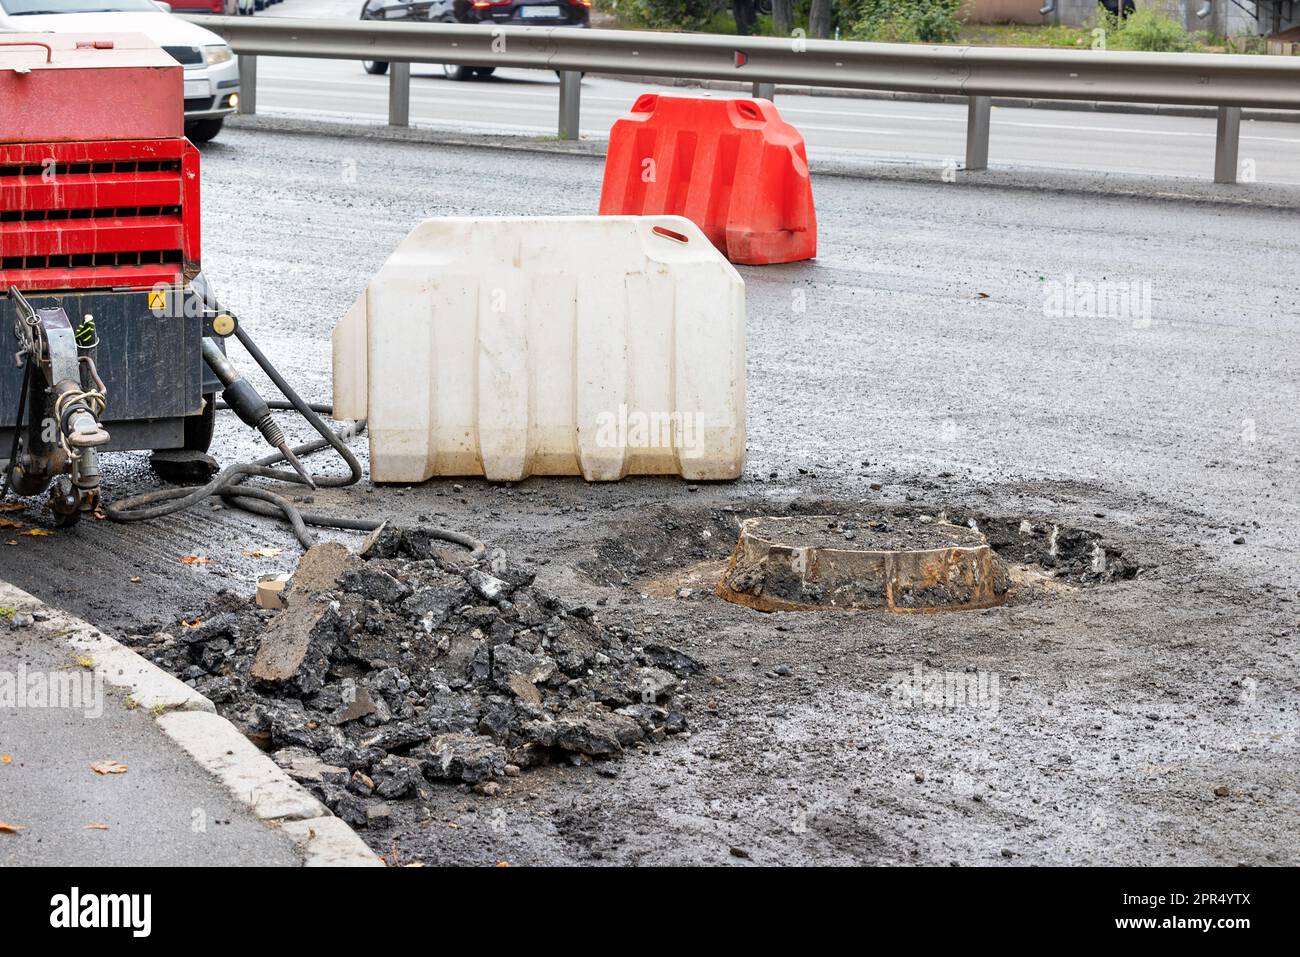 A pneumatic road compressor with a jackhammer stands near a sewer manhole being repaired on the carriageway of a city road. Copy space. Stock Photo